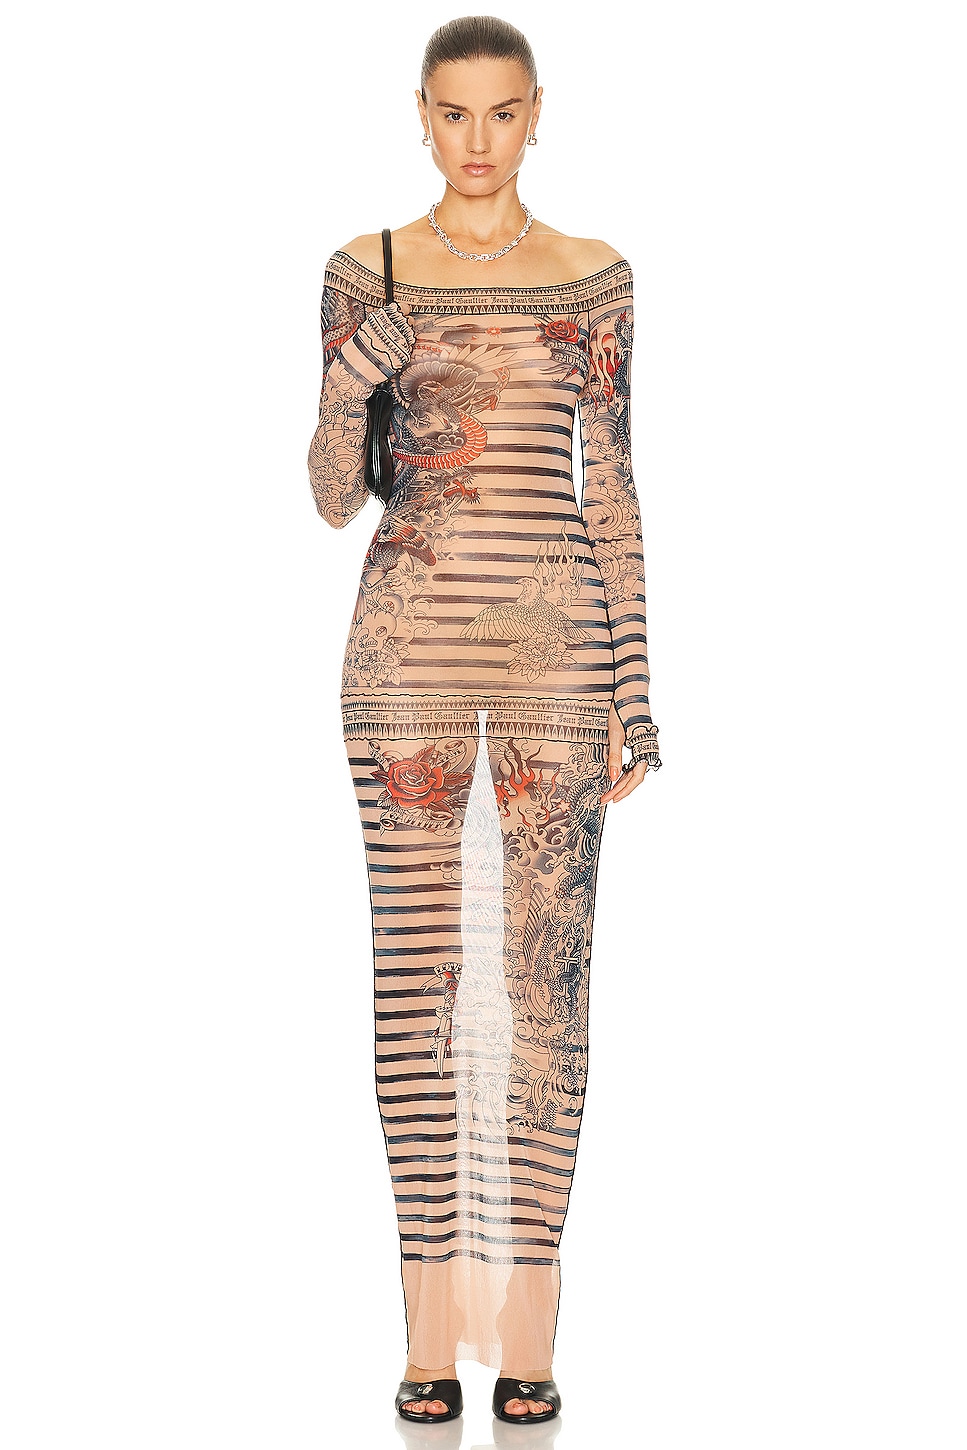 Image 1 of Jean Paul Gaultier Printed Mariniere Tattoo Long Boat Neck Dress in Nude, Blue, & Red